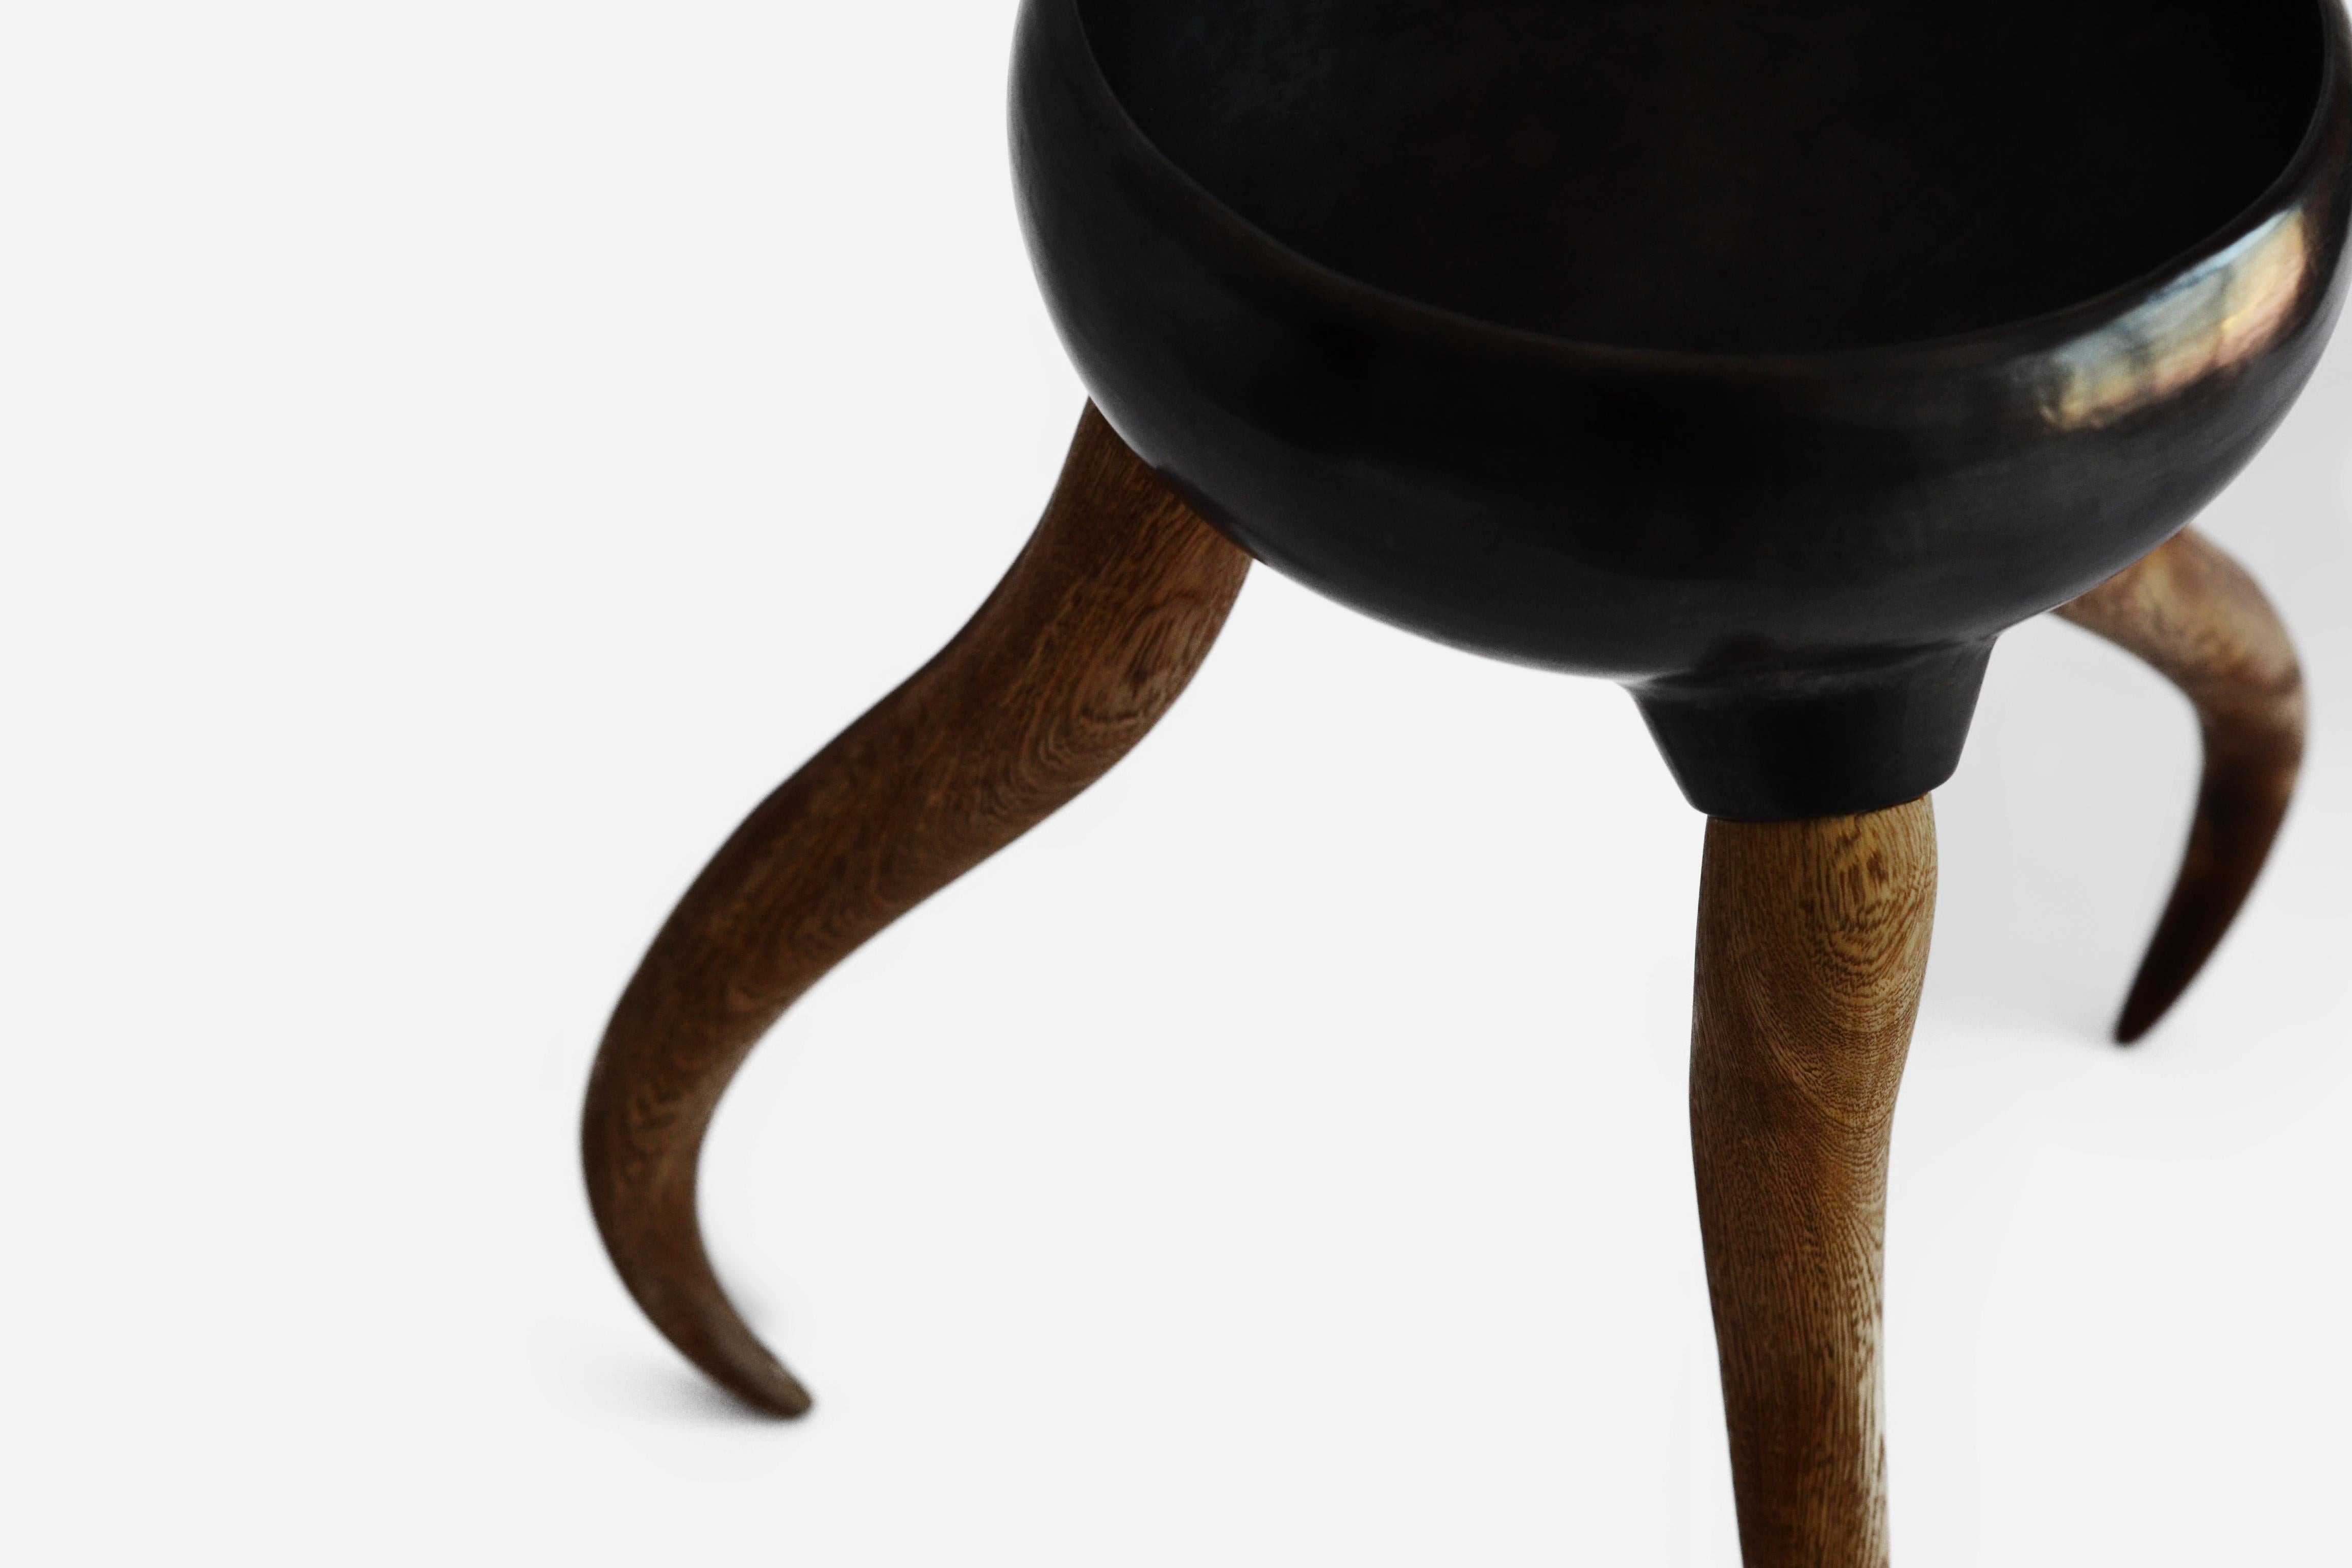 A set of vessels made in barro negro bruñido (burnished Black clay) from Oaxaca, with legs carved in rose wood from a master carpenter in Tlaquepaque, Jalisco.

The concept of this series is related to the story of La noche triste (the sad night),